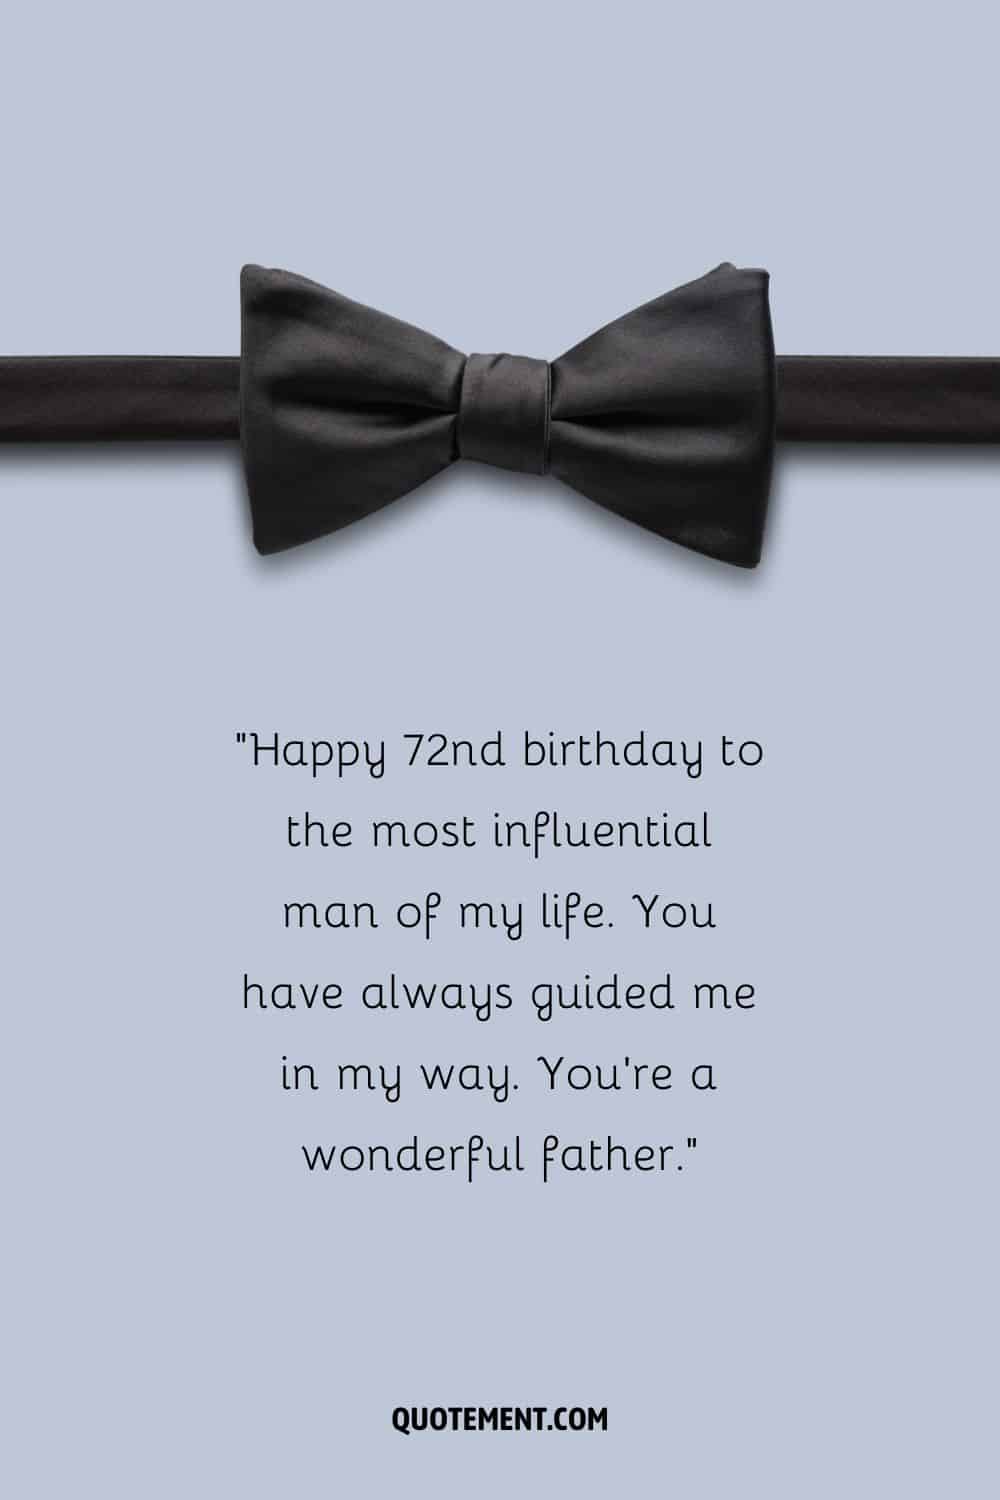 men's bow tie representing 72nd birthday wish for dad